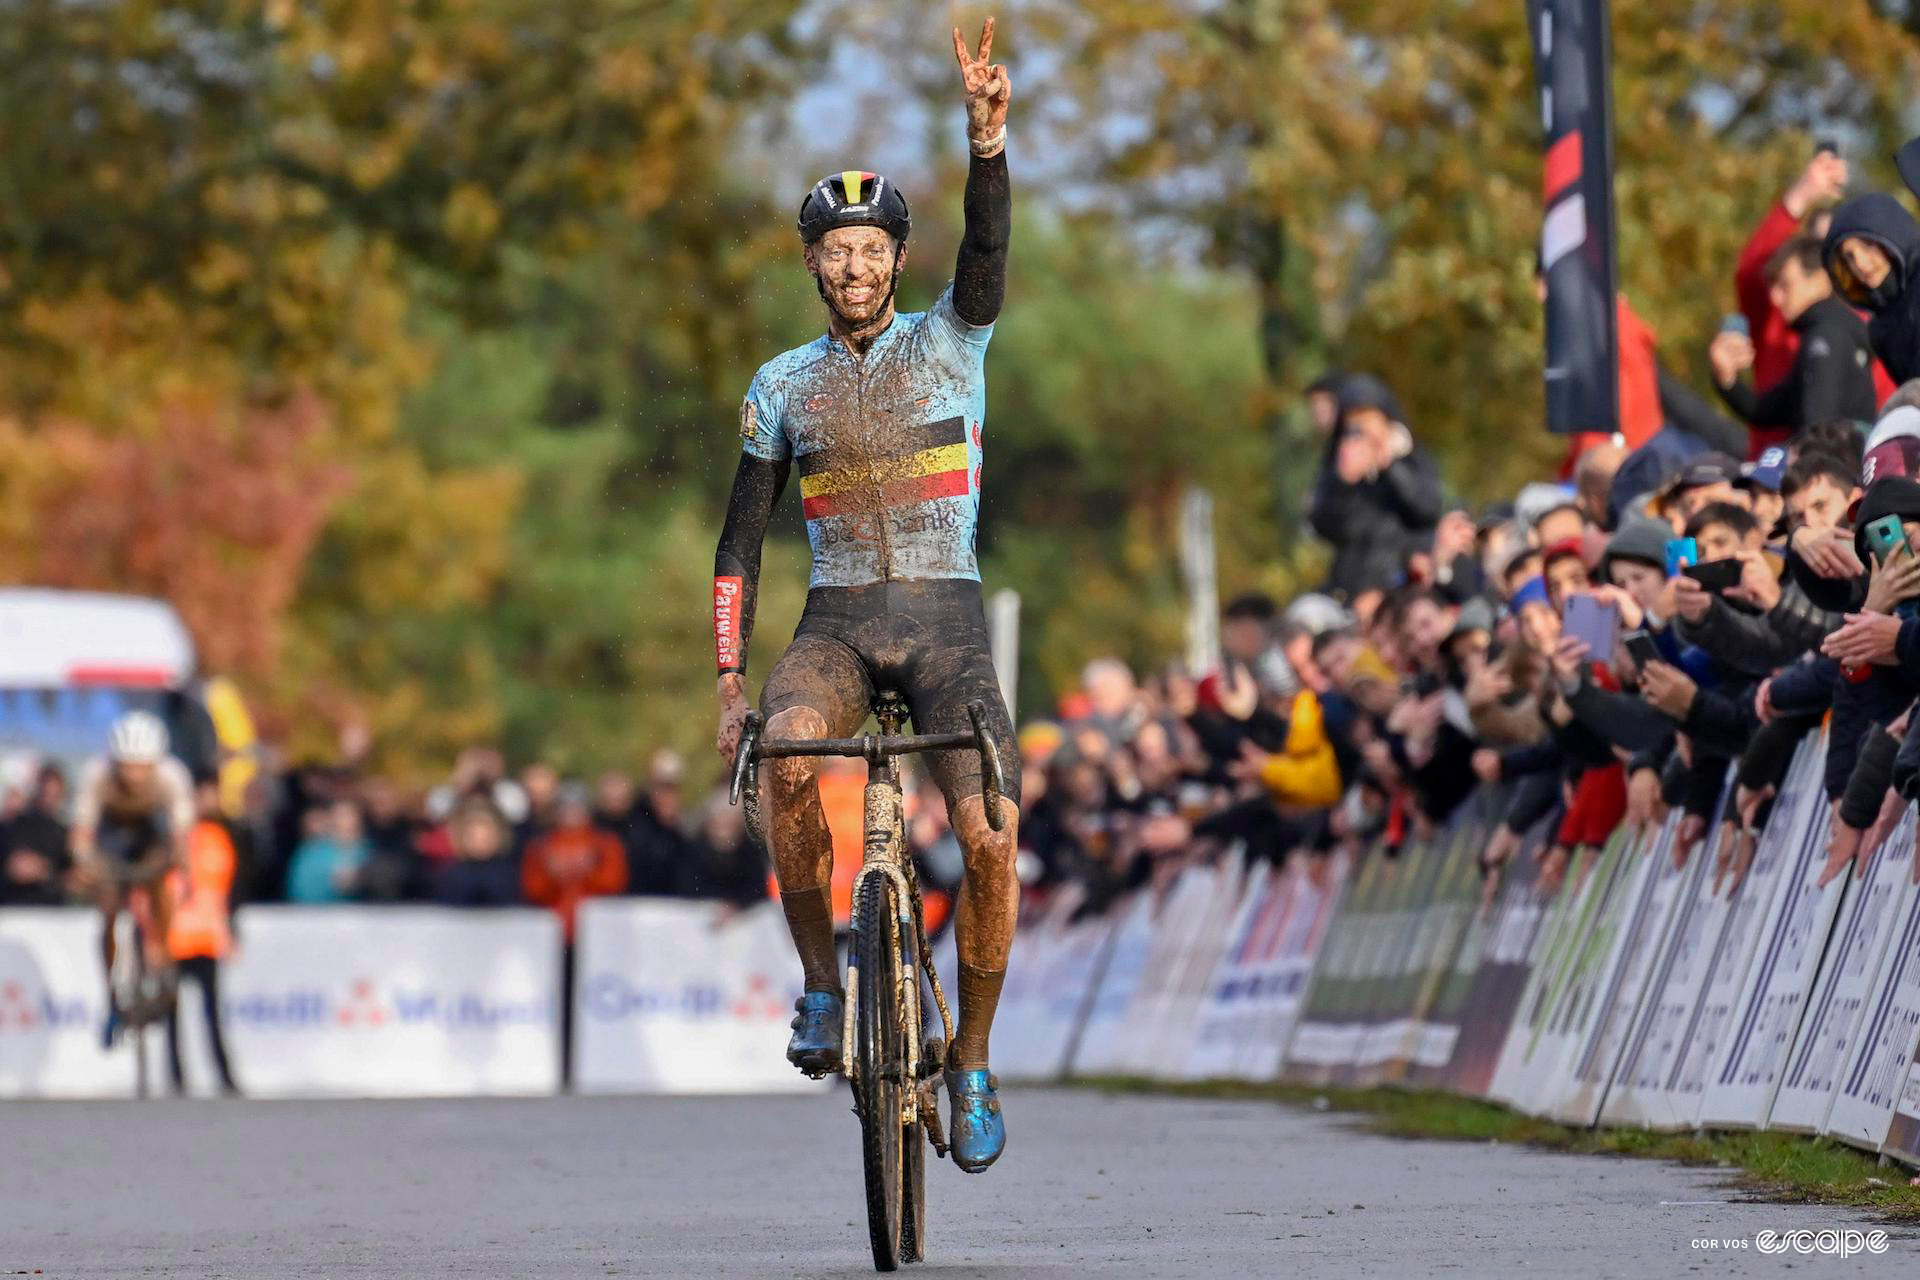 Michael Vanthourenhout sits up as he celebrates winning the european cyclocross title, two fingers raised to the sky.